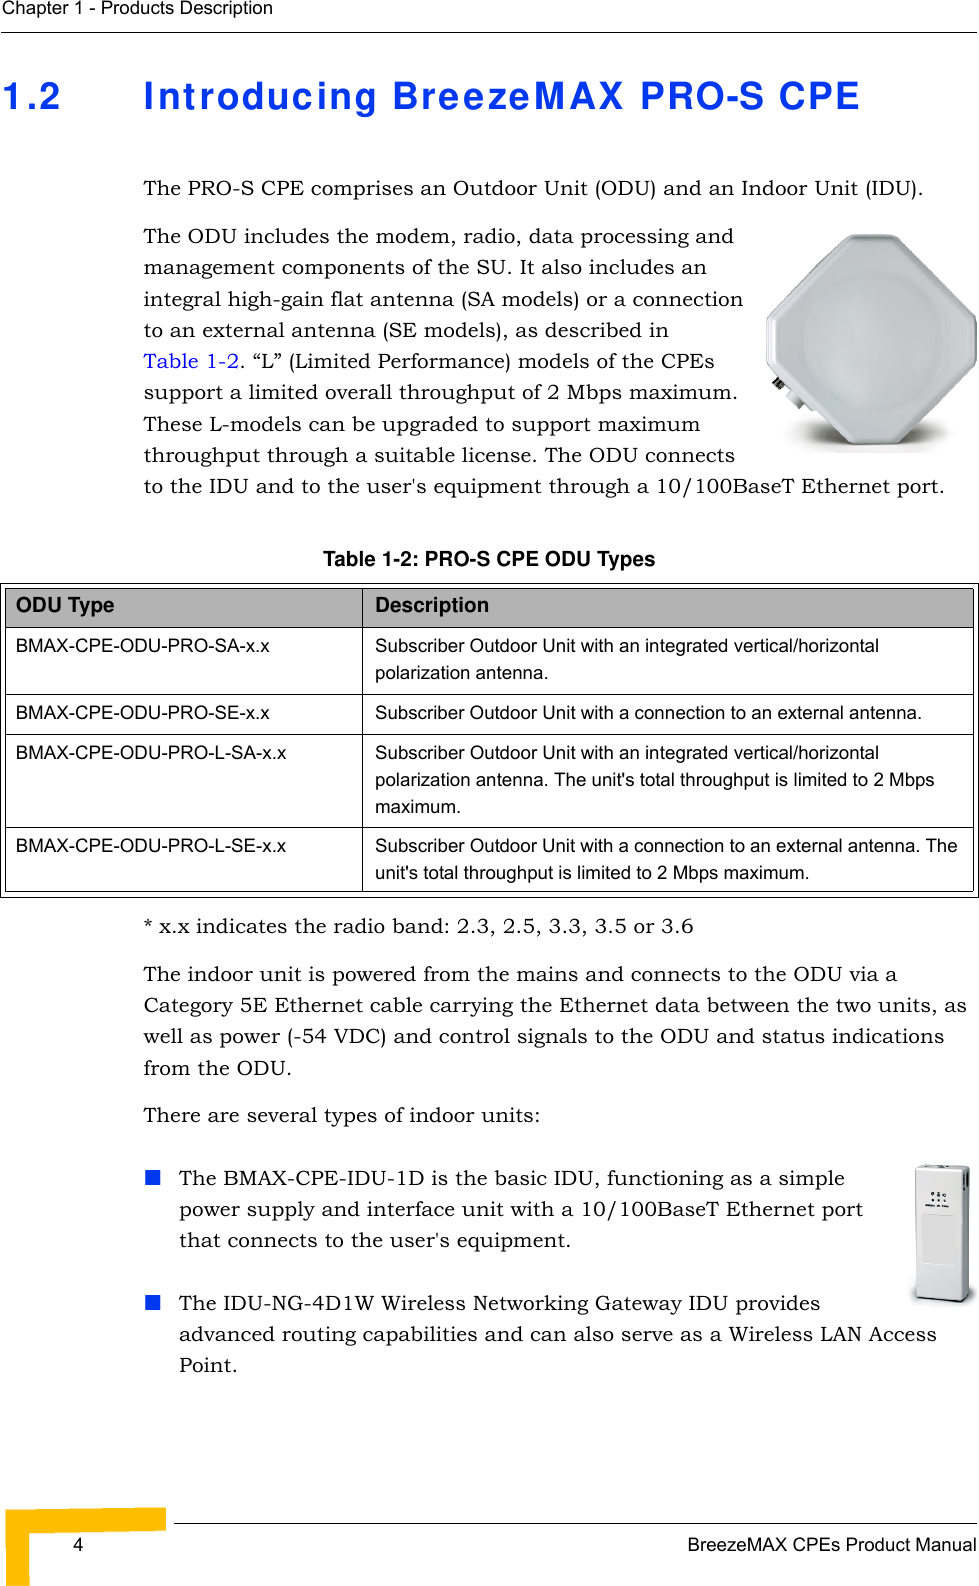 4BreezeMAX CPEs Product ManualChapter 1 - Products Description1.2 Introducing BreezeMAX PRO-S CPEThe PRO-S CPE comprises an Outdoor Unit (ODU) and an Indoor Unit (IDU).The ODU includes the modem, radio, data processing and management components of the SU. It also includes an integral high-gain flat antenna (SA models) or a connection to an external antenna (SE models), as described in Table 1-2. “L” (Limited Performance) models of the CPEs support a limited overall throughput of 2 Mbps maximum. These L-models can be upgraded to support maximum throughput through a suitable license. The ODU connects to the IDU and to the user&apos;s equipment through a 10/100BaseT Ethernet port.* x.x indicates the radio band: 2.3, 2.5, 3.3, 3.5 or 3.6The indoor unit is powered from the mains and connects to the ODU via a Category 5E Ethernet cable carrying the Ethernet data between the two units, as well as power (-54 VDC) and control signals to the ODU and status indications from the ODU. There are several types of indoor units:The BMAX-CPE-IDU-1D is the basic IDU, functioning as a simple power supply and interface unit with a 10/100BaseT Ethernet port that connects to the user&apos;s equipment. The IDU-NG-4D1W Wireless Networking Gateway IDU provides advanced routing capabilities and can also serve as a Wireless LAN Access Point.Table 1-2: PRO-S CPE ODU Types ODU Type DescriptionBMAX-CPE-ODU-PRO-SA-x.x Subscriber Outdoor Unit with an integrated vertical/horizontal polarization antenna. BMAX-CPE-ODU-PRO-SE-x.x Subscriber Outdoor Unit with a connection to an external antenna. BMAX-CPE-ODU-PRO-L-SA-x.x Subscriber Outdoor Unit with an integrated vertical/horizontal polarization antenna. The unit&apos;s total throughput is limited to 2 Mbps maximum.BMAX-CPE-ODU-PRO-L-SE-x.x Subscriber Outdoor Unit with a connection to an external antenna. The unit&apos;s total throughput is limited to 2 Mbps maximum.